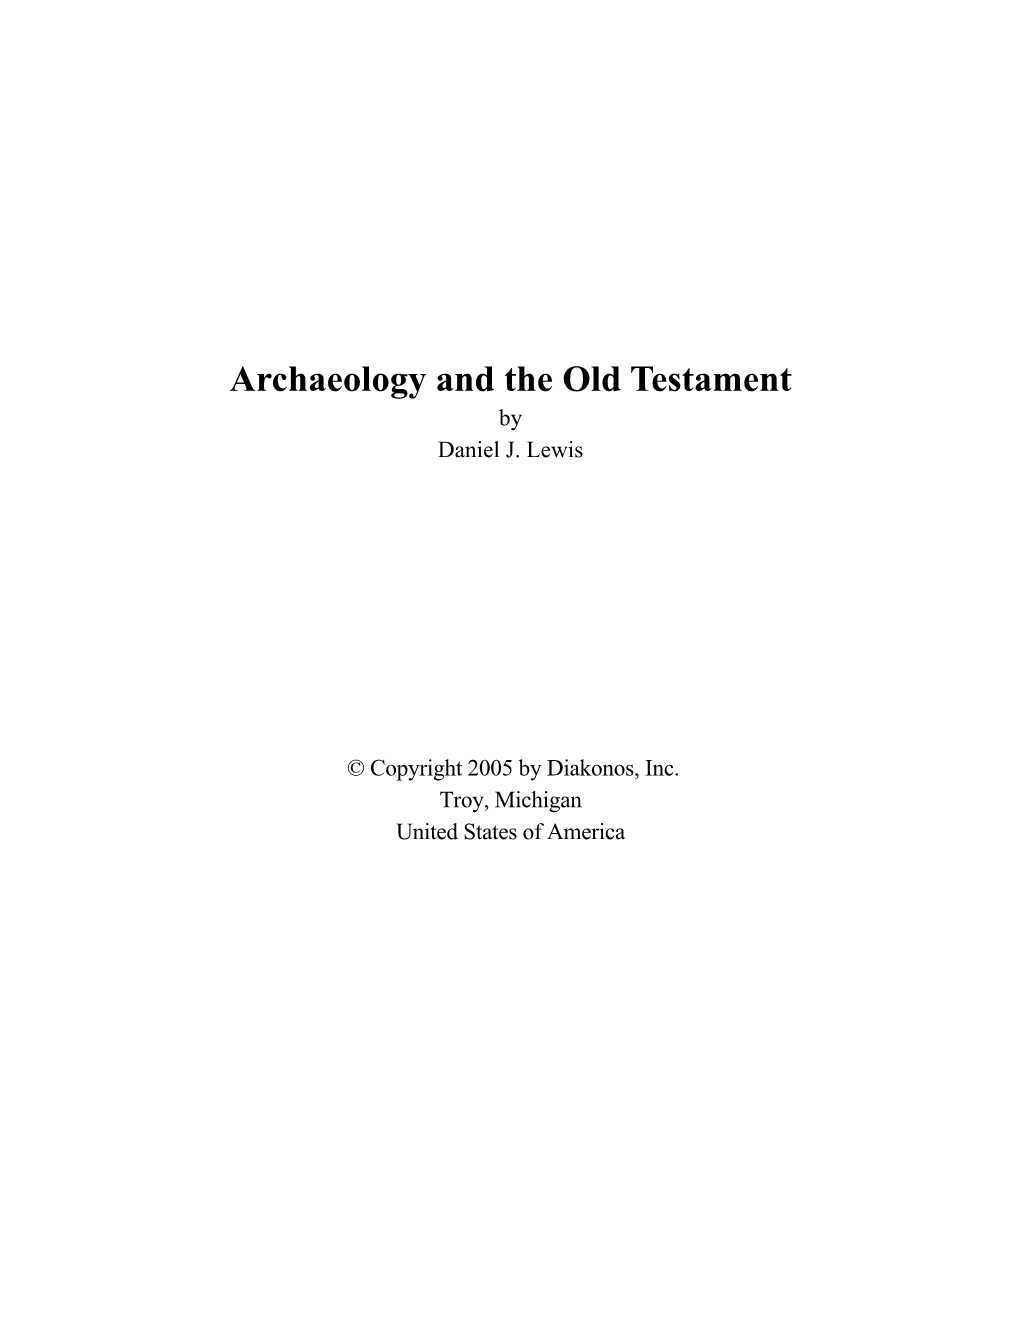 Archaeology and the Old Testament by Daniel J